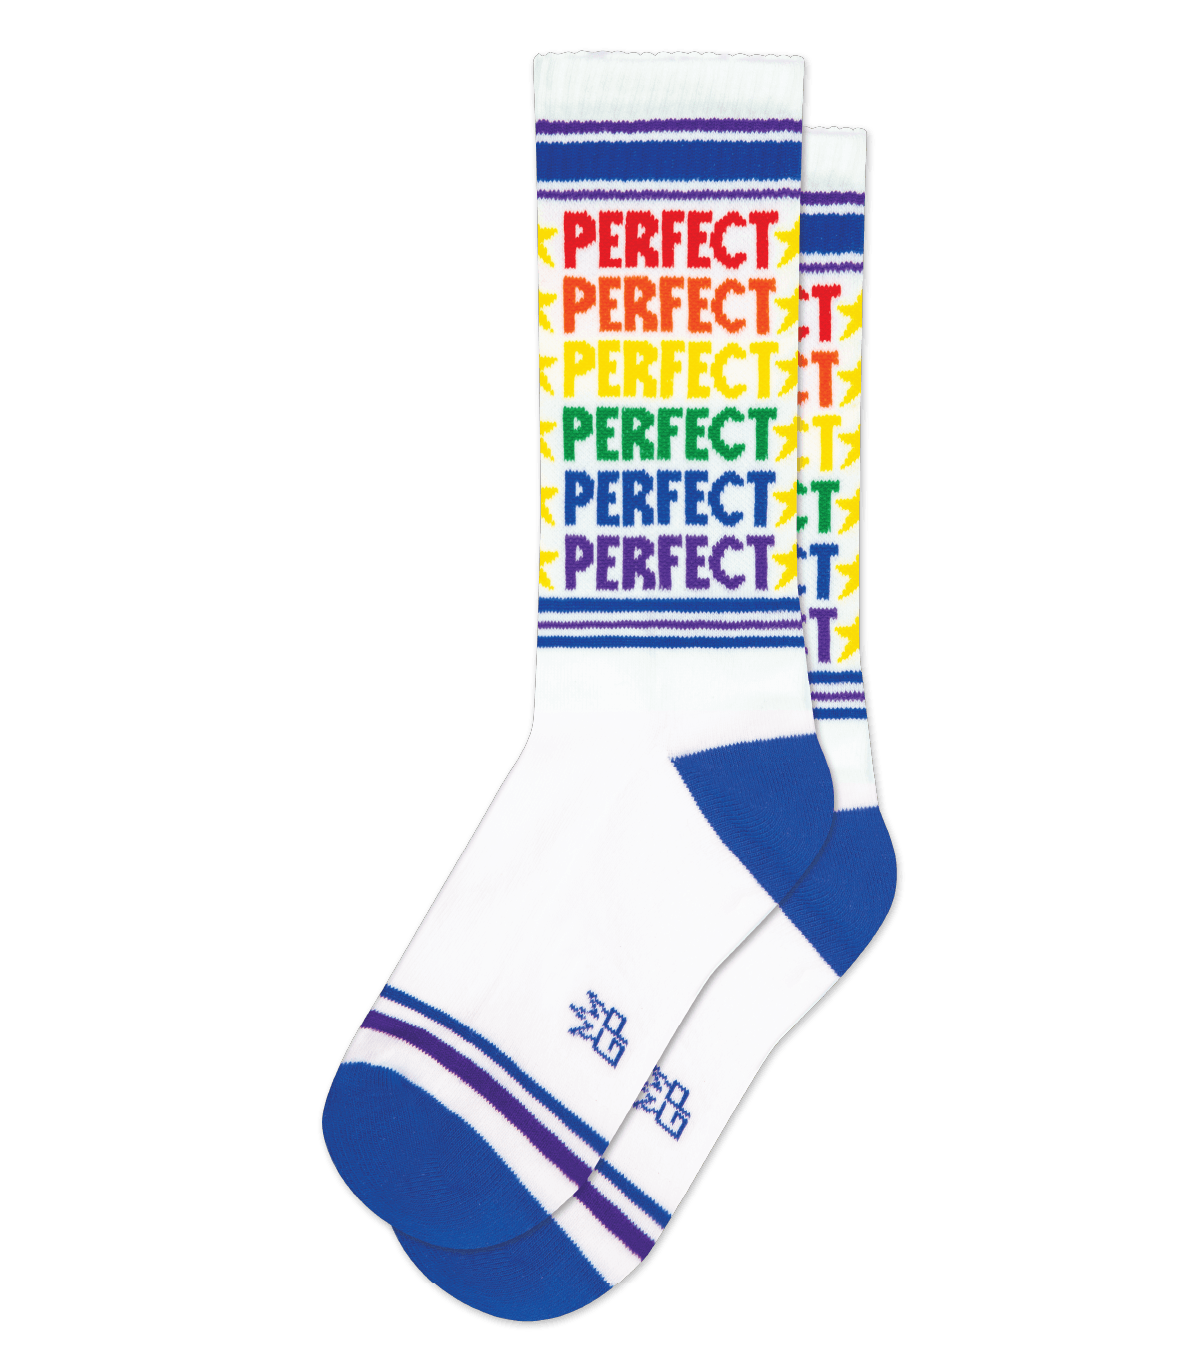 Perfect Perfect Perfect - Gym Crew Socks – Gumball Poodle